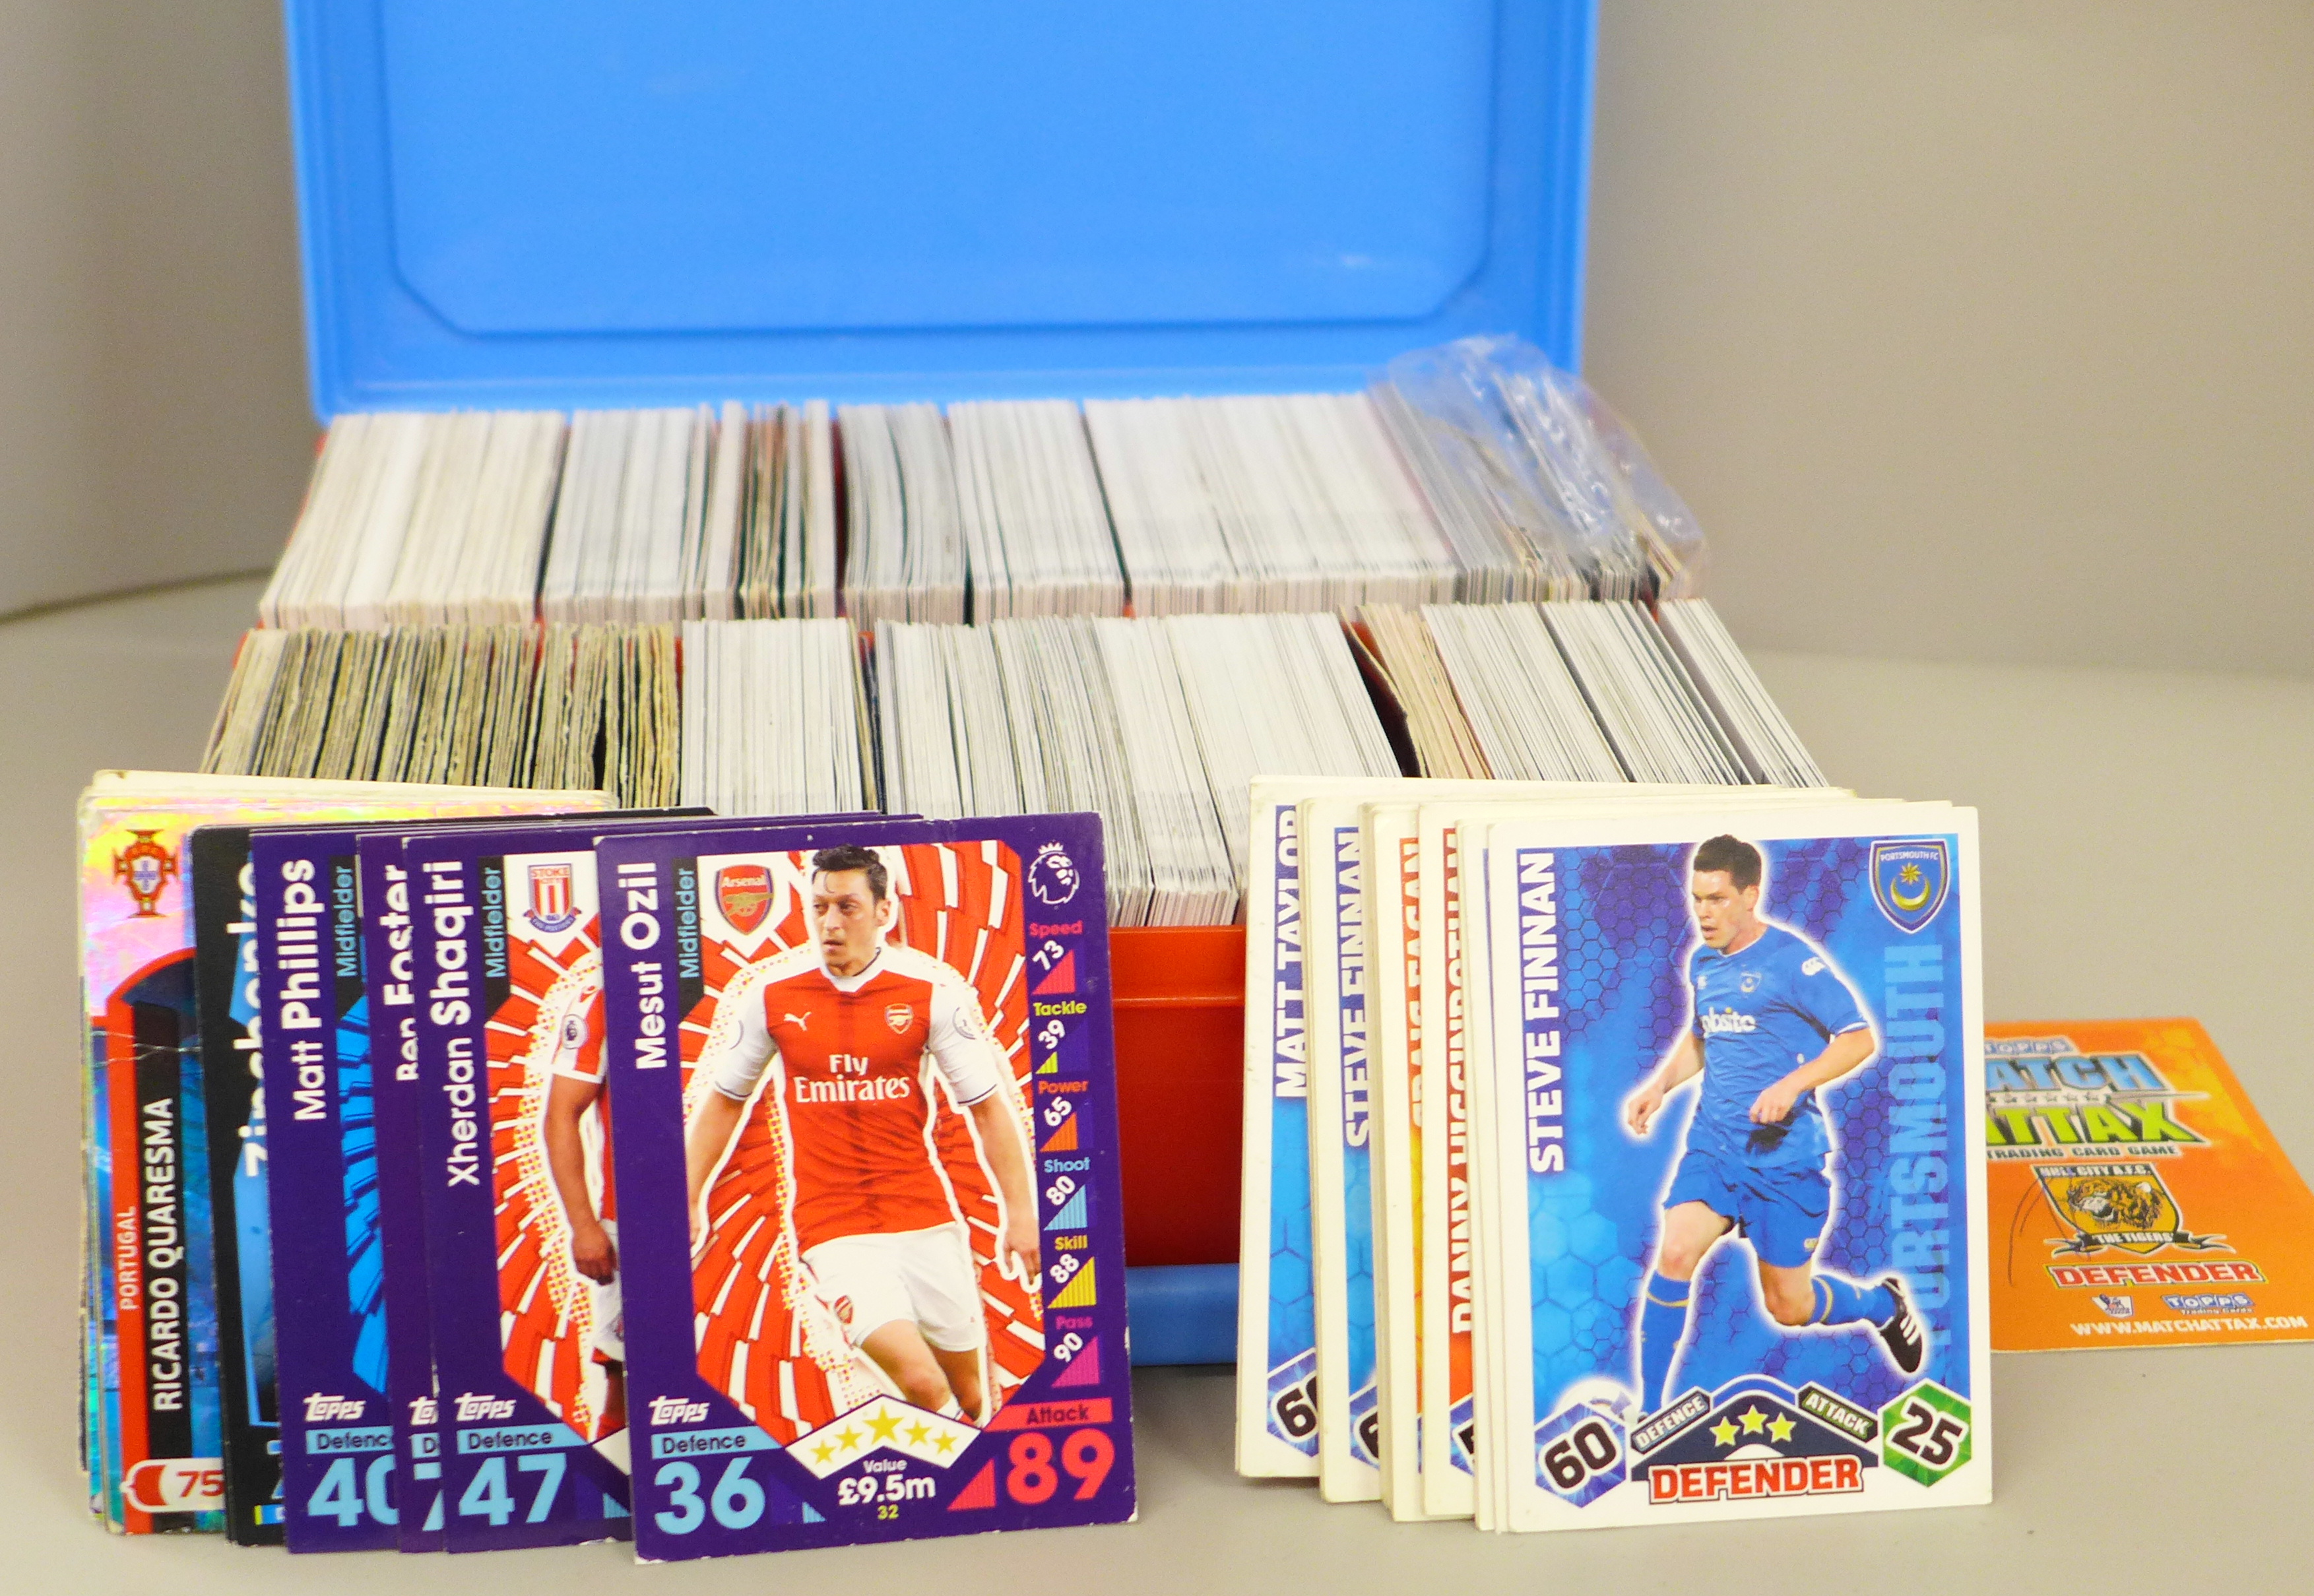 Approximately 500 Match Attax collectors cards in case